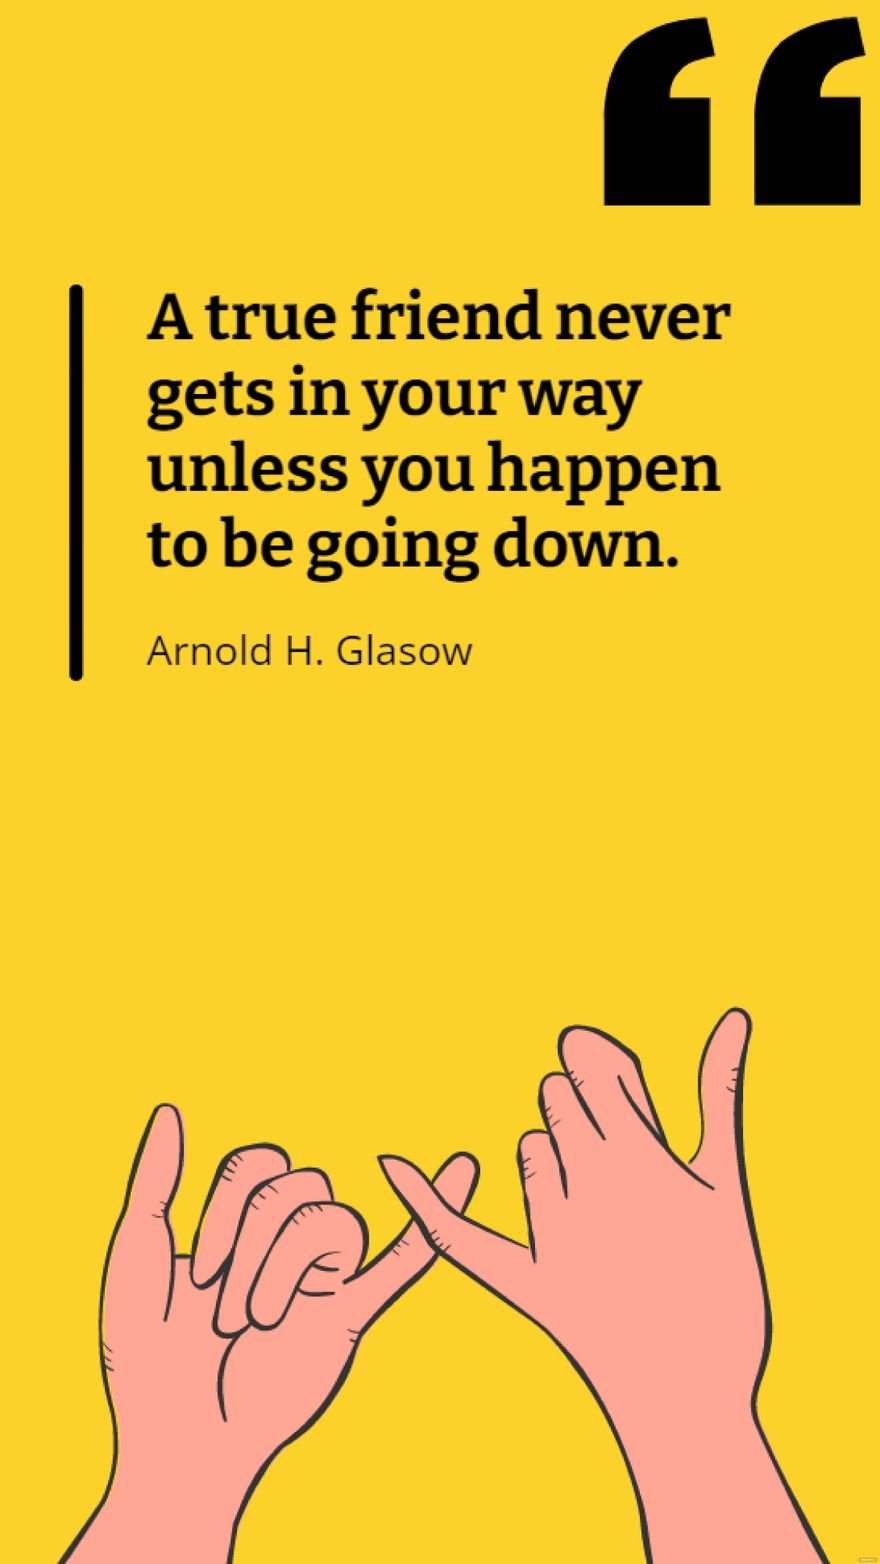 Arnold H. Glasow - A true friend never gets in your way unless you happen to be going down.